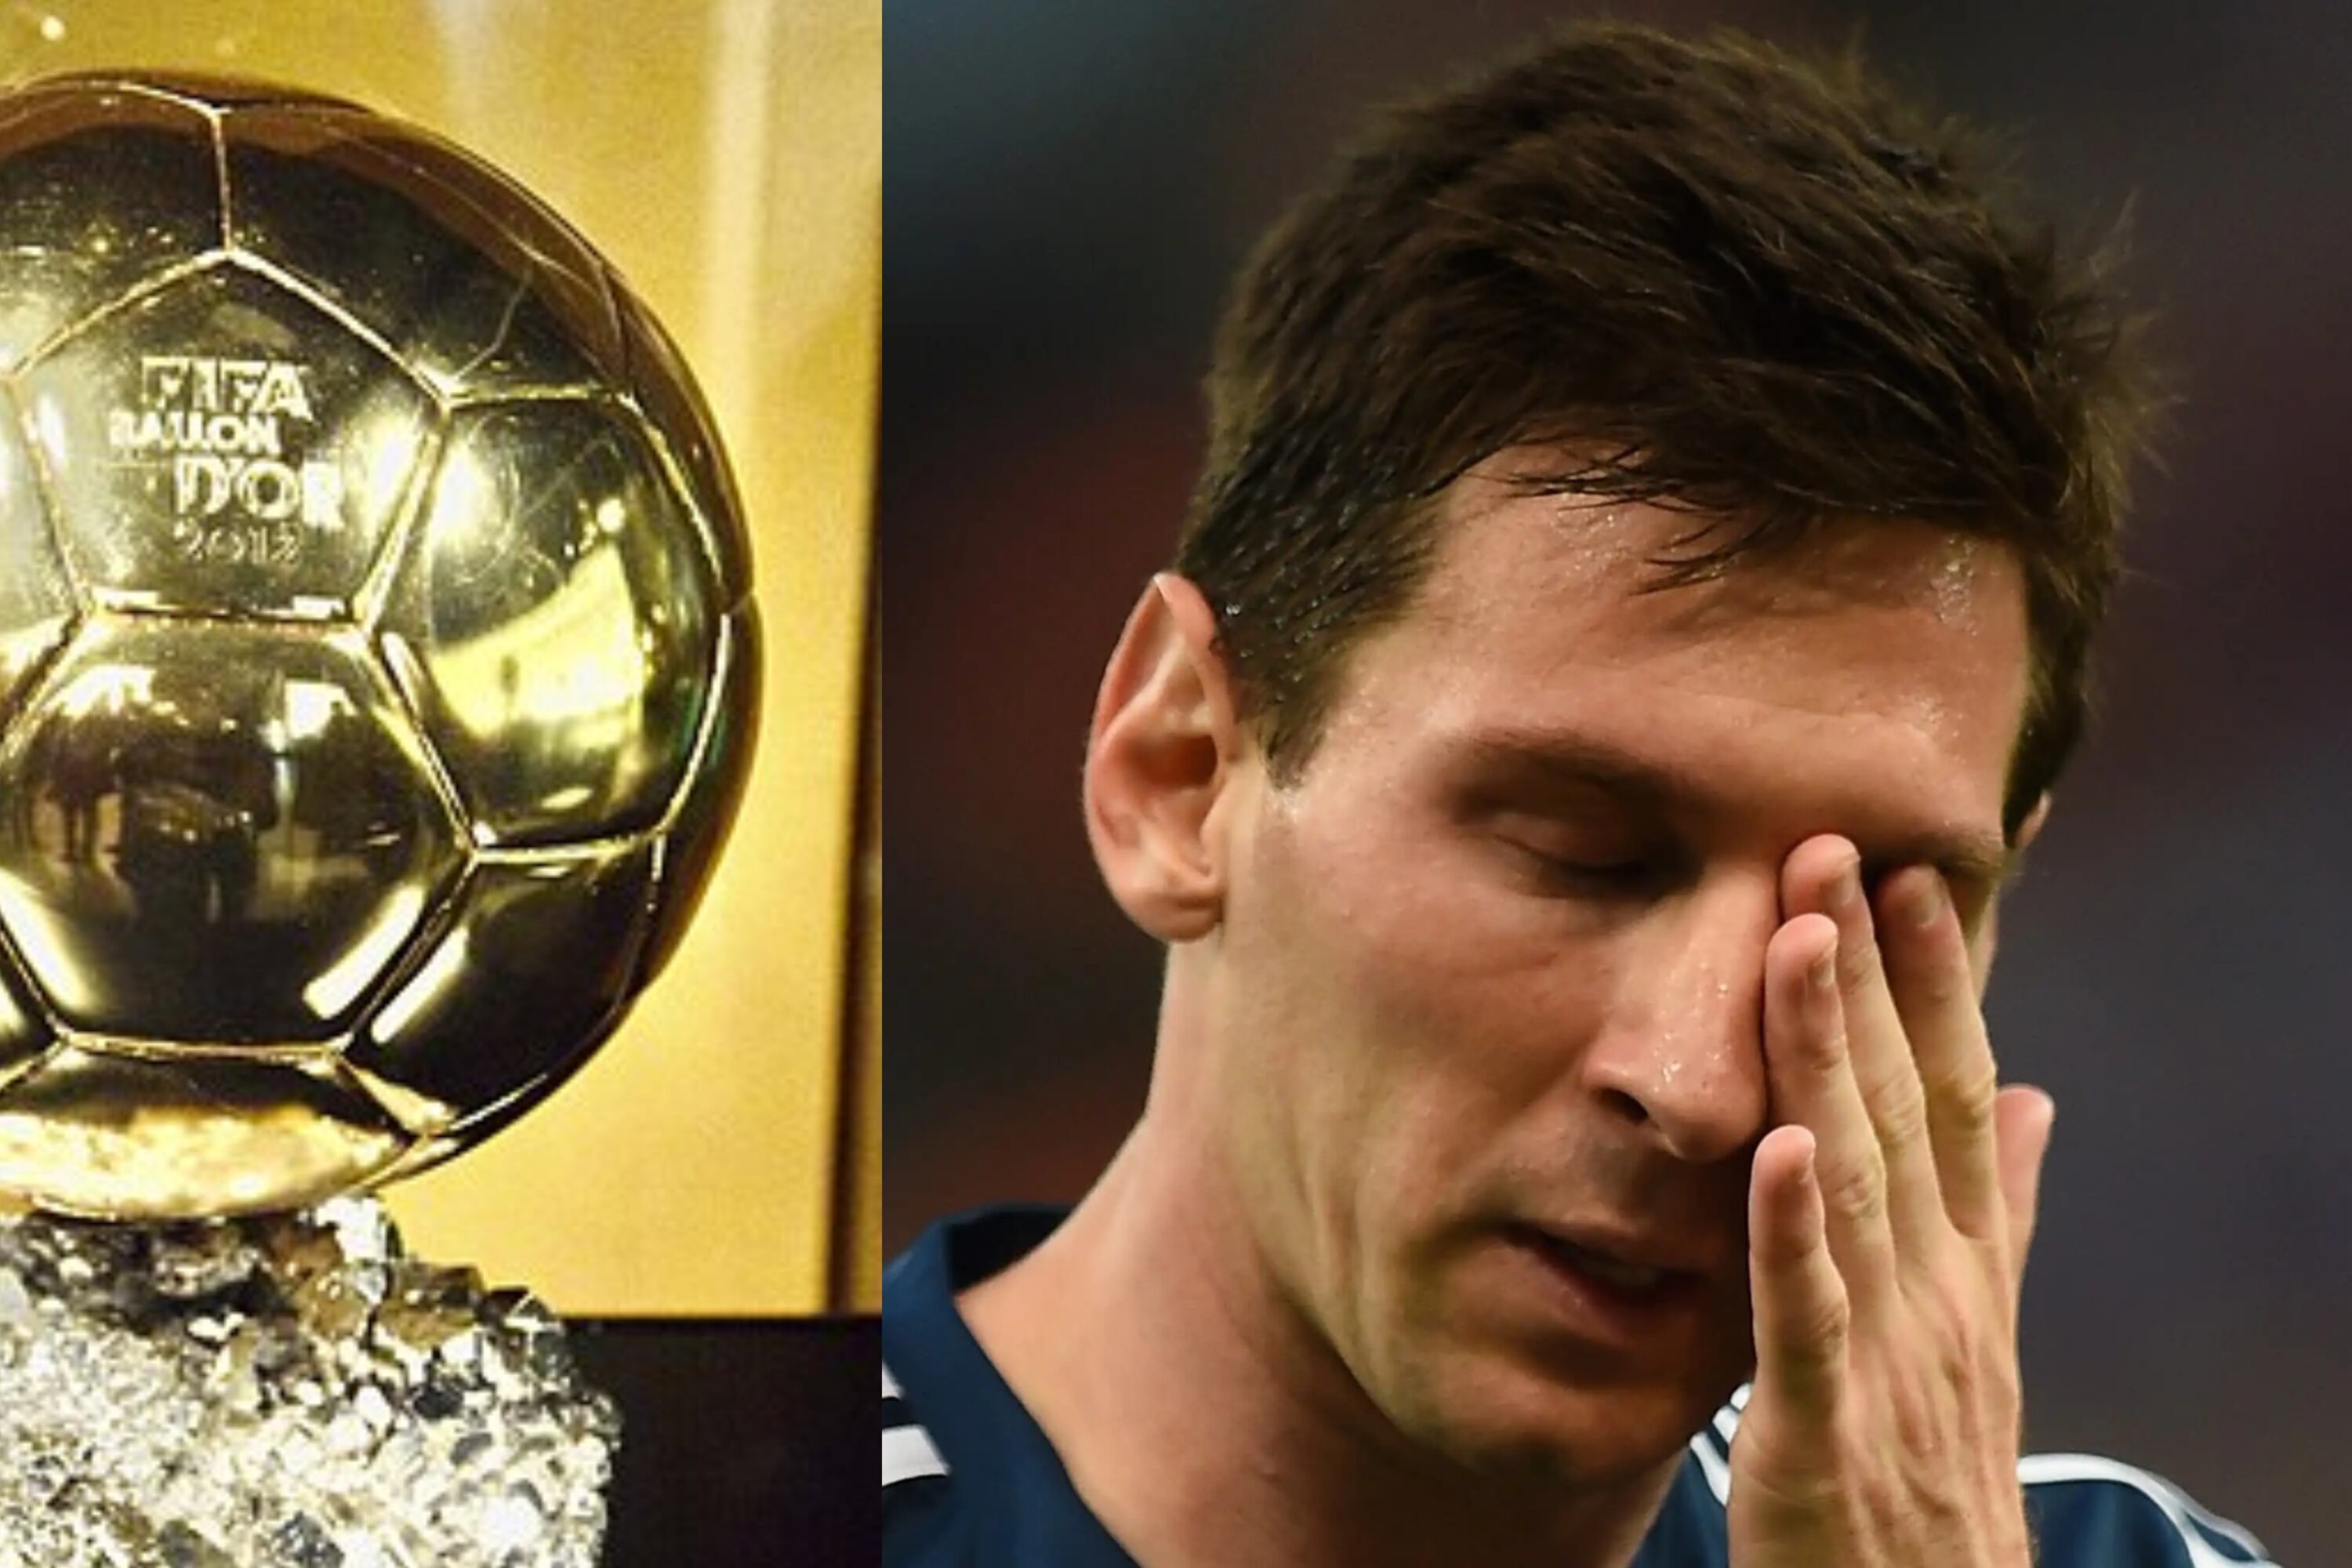 He said that Messi was not the best, won two Ballon d'Ors, now he loses his life and the world mourns